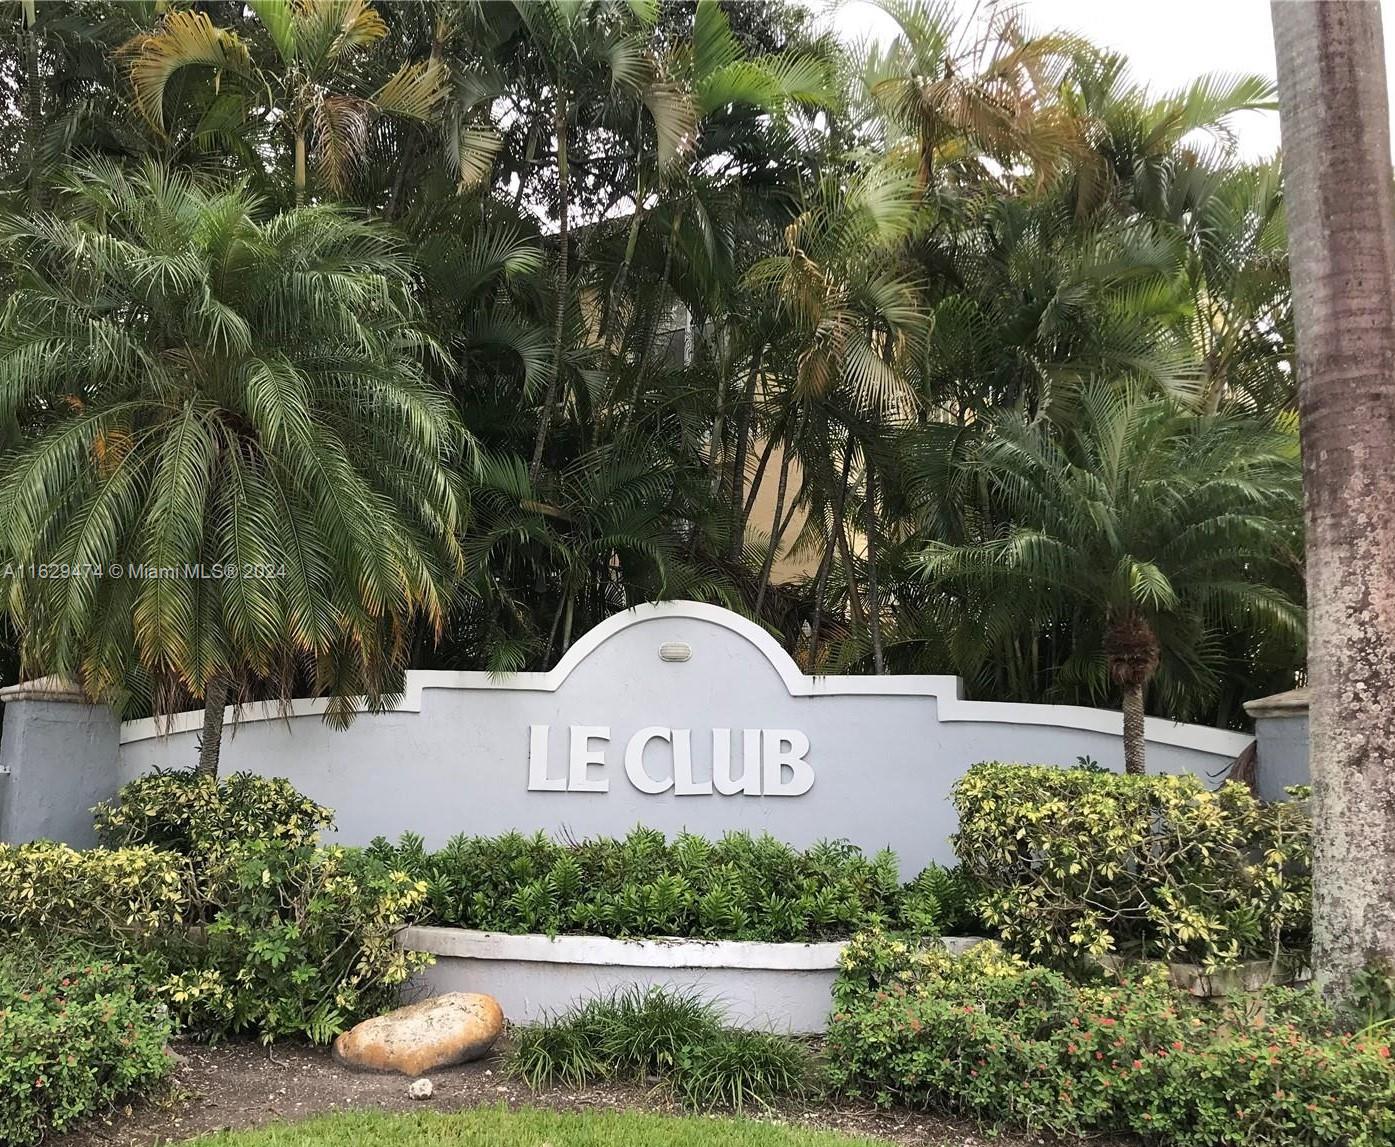 This spacious 1-bedroom apartment in Cutler Bay is move-in ready! It's located on the second floor and includes a washer and dryer inside the unit. Le Club offers resort-style living with amenities such as BBQ areas, tennis courts, a beautiful pool overlooking a scenic lake.